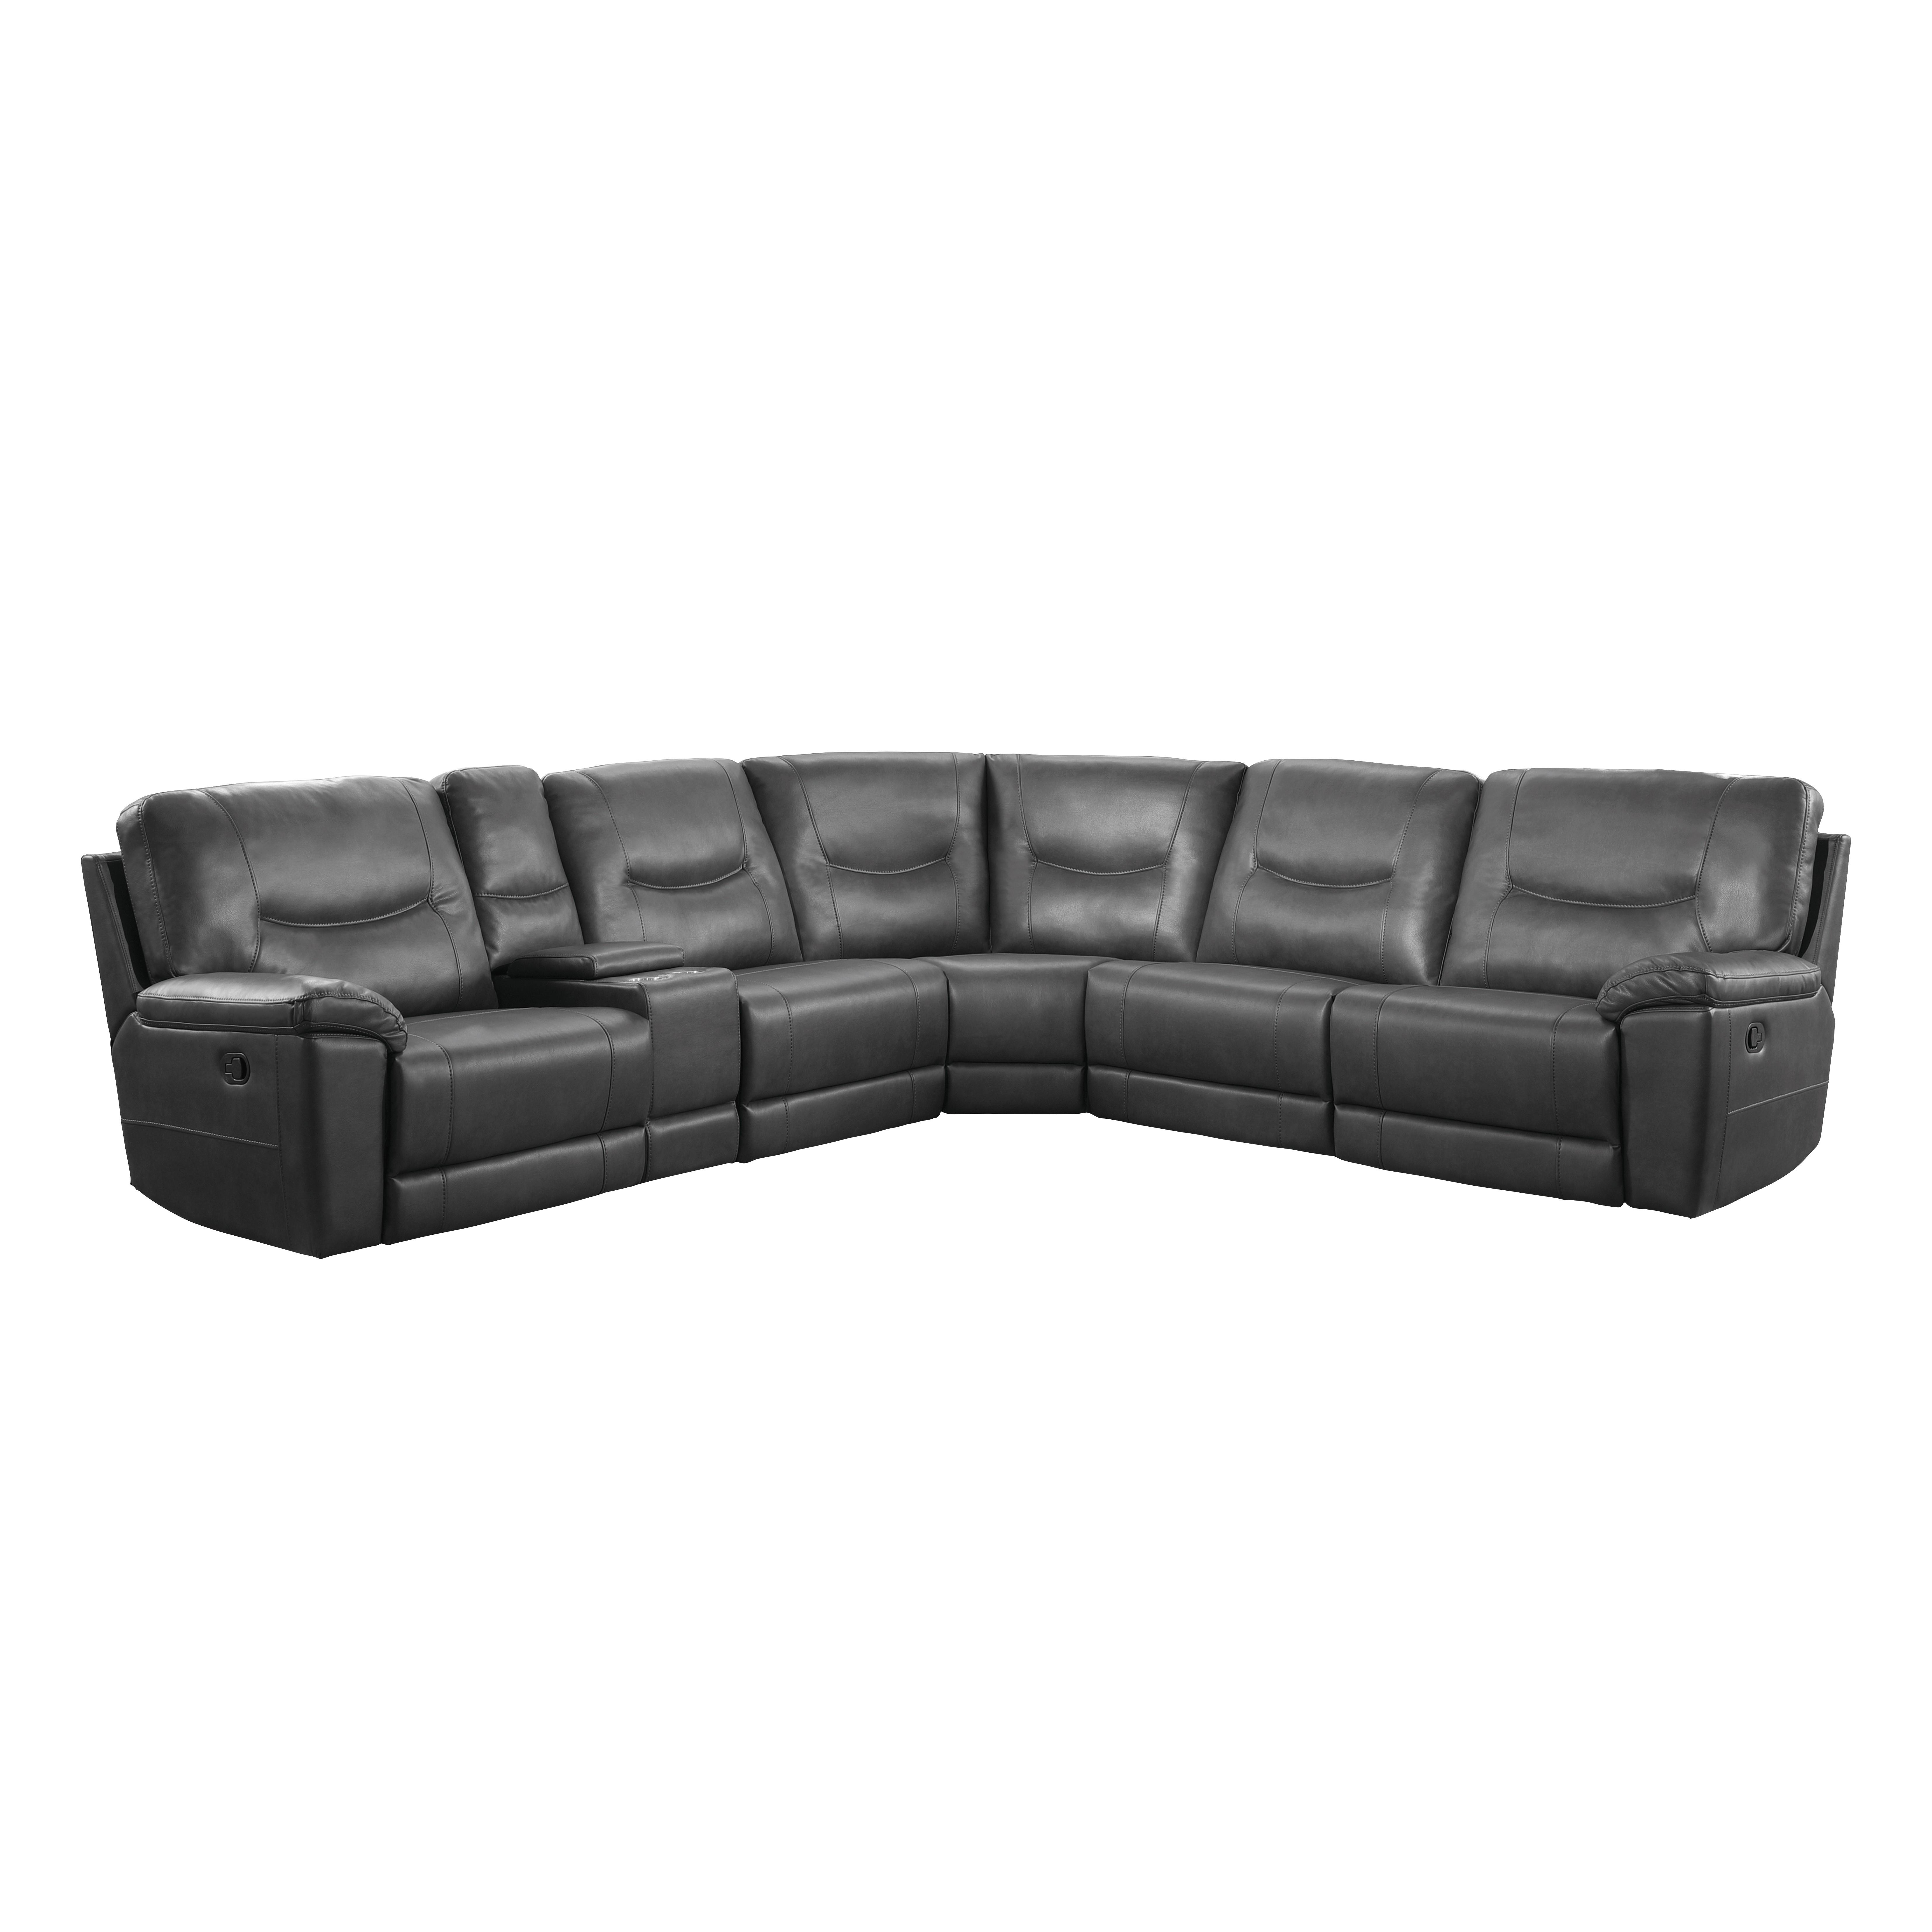 Modern Reclining Sectional 8490GRY*6LRRR Columbus 8490GRY*6LRRR in Gray Faux Leather